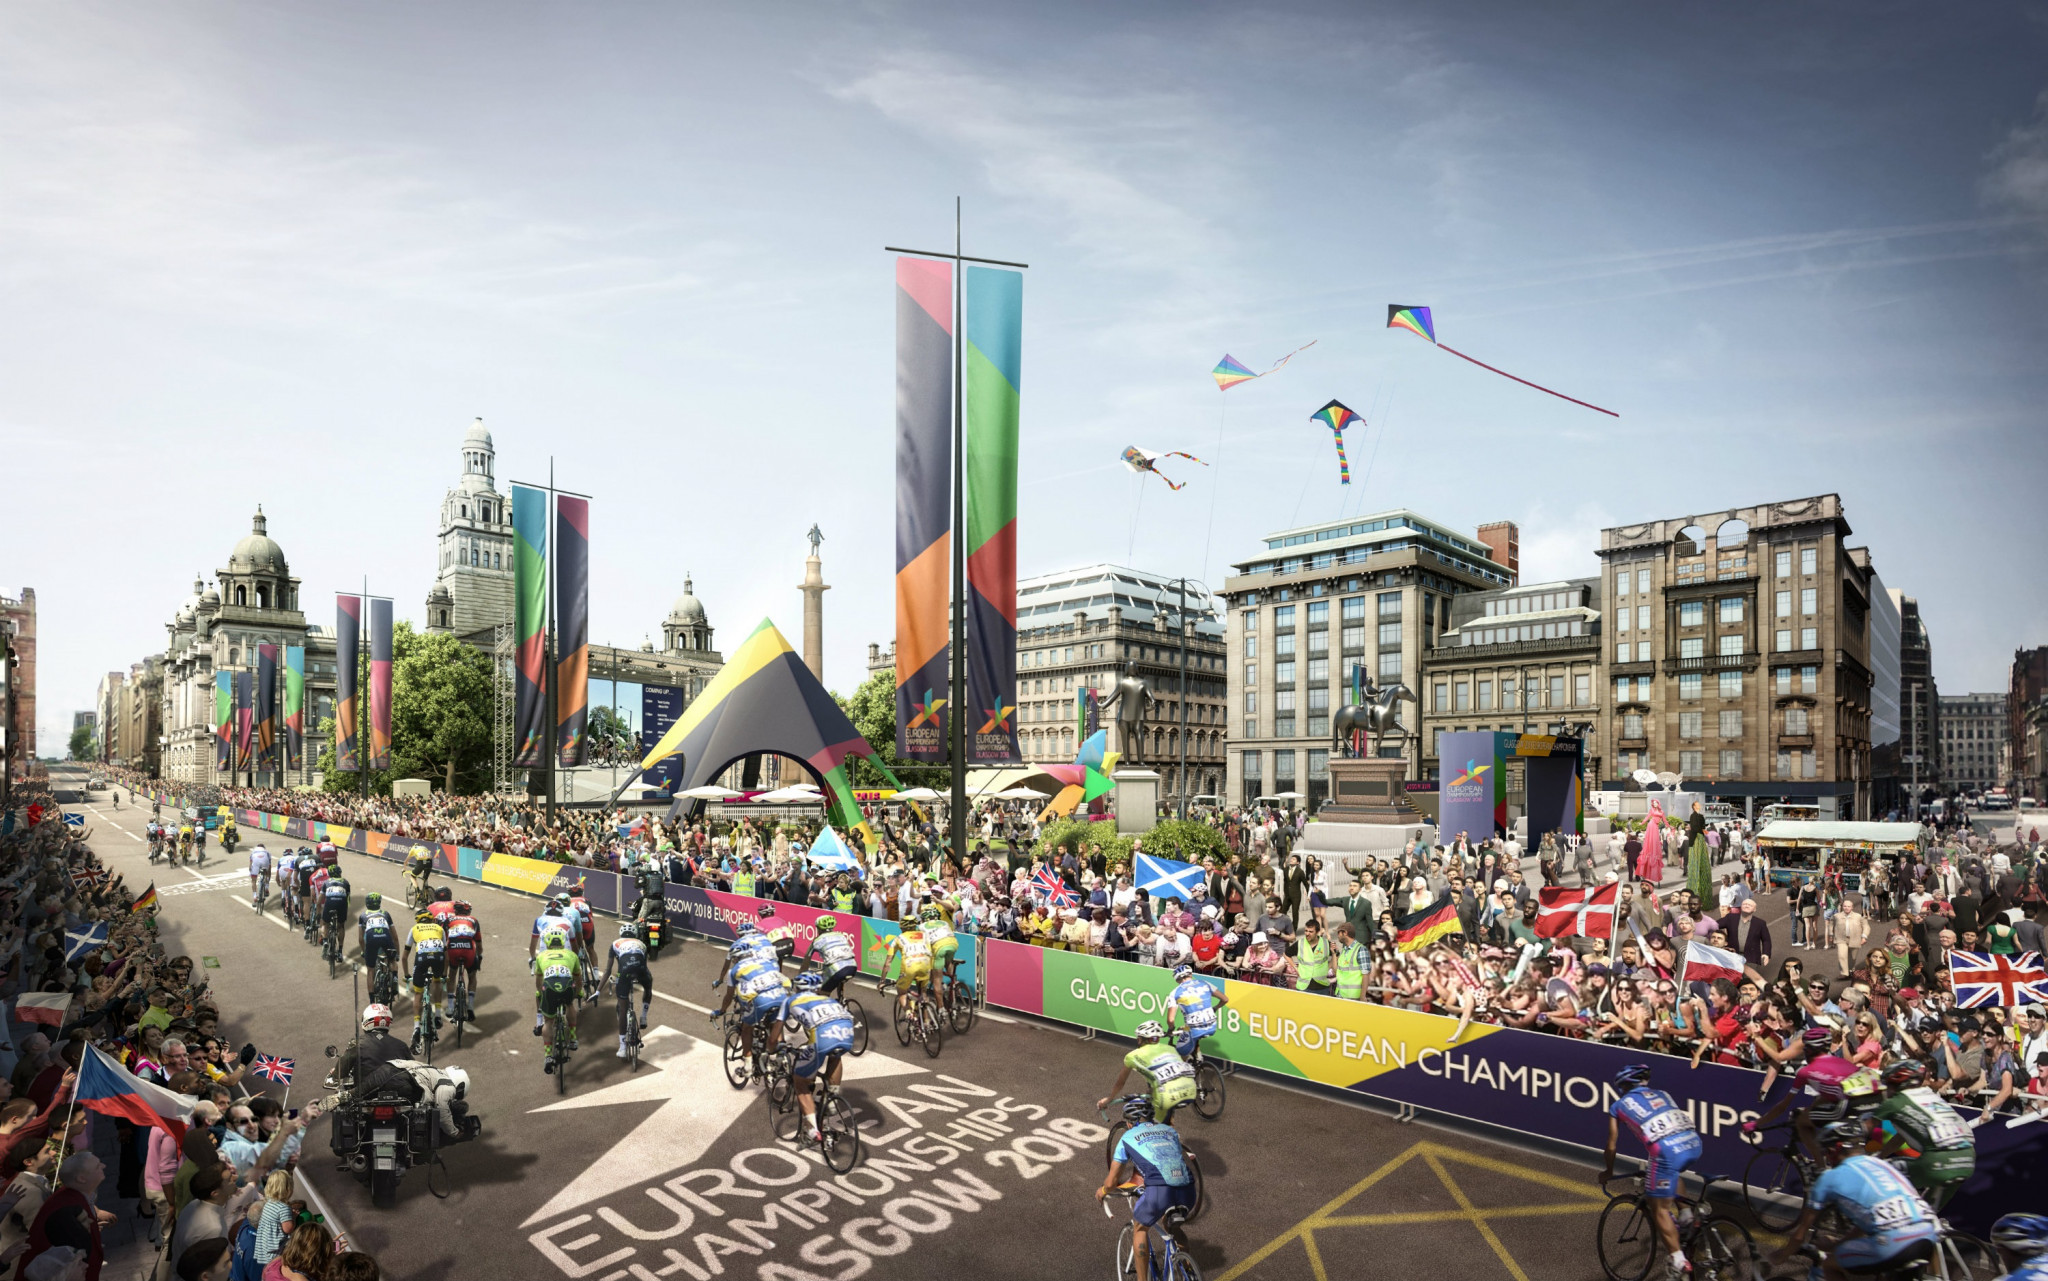 Glasgow 2018 organisers claim million people expected to be part of event with 100 days to go